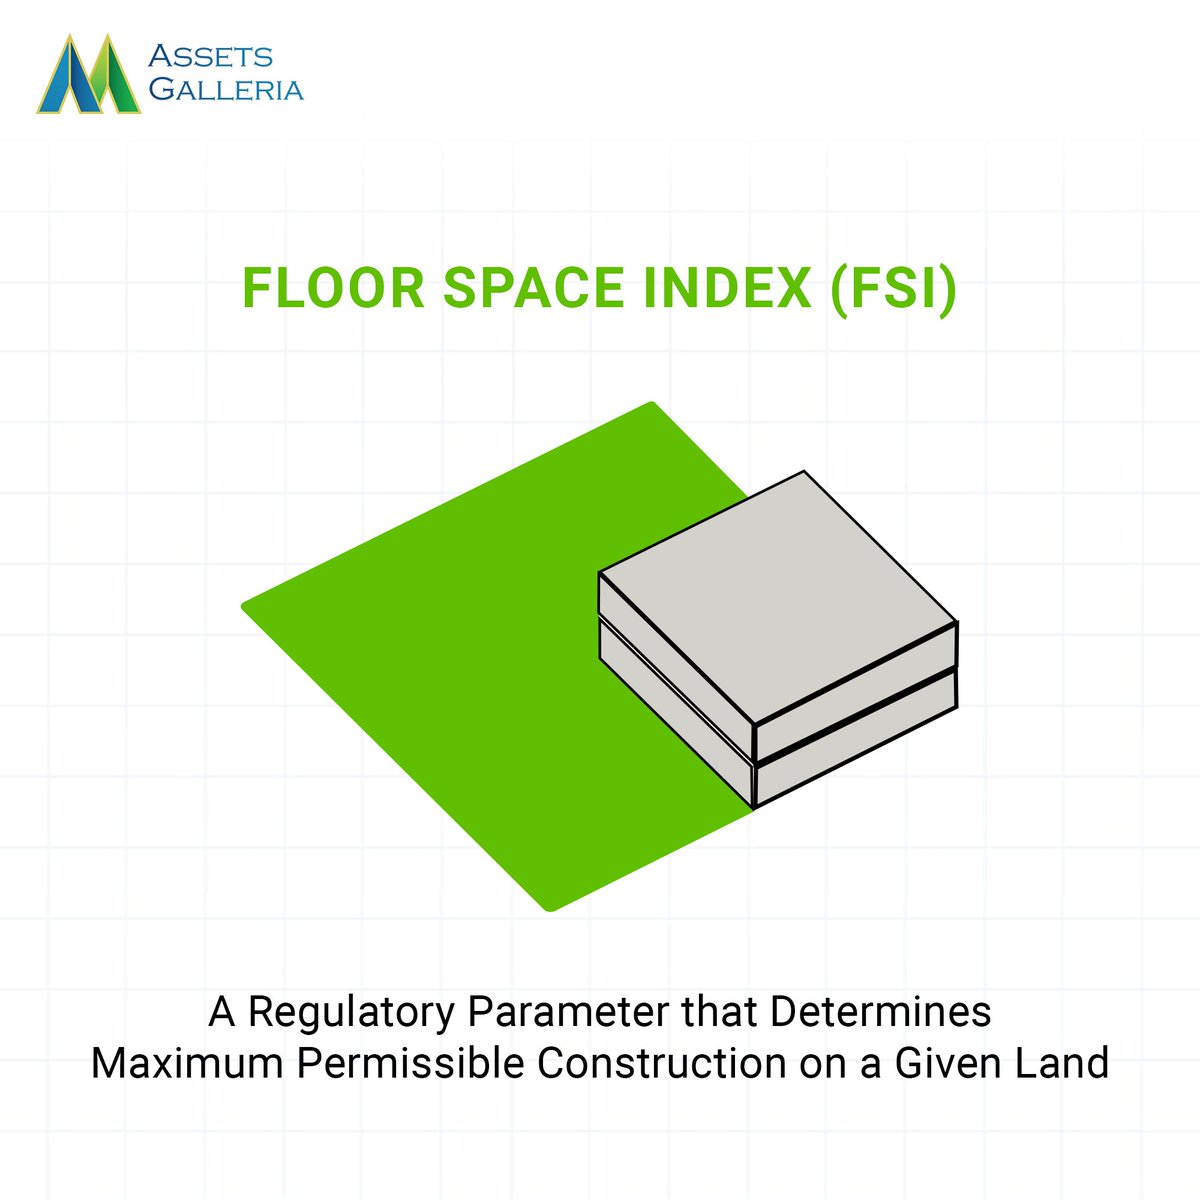 #FloorSpaceIndex (FSI) is often used to calculate the built-up area. #Follow #AssetsGalleria to know more.

#DreamHome #HomeForSale #PropertyListing #HouseHunting #DreamHouse #HomeSweetHome #LuxuryLiving #RealEstateForSale #NewListing #HouseofTheDay